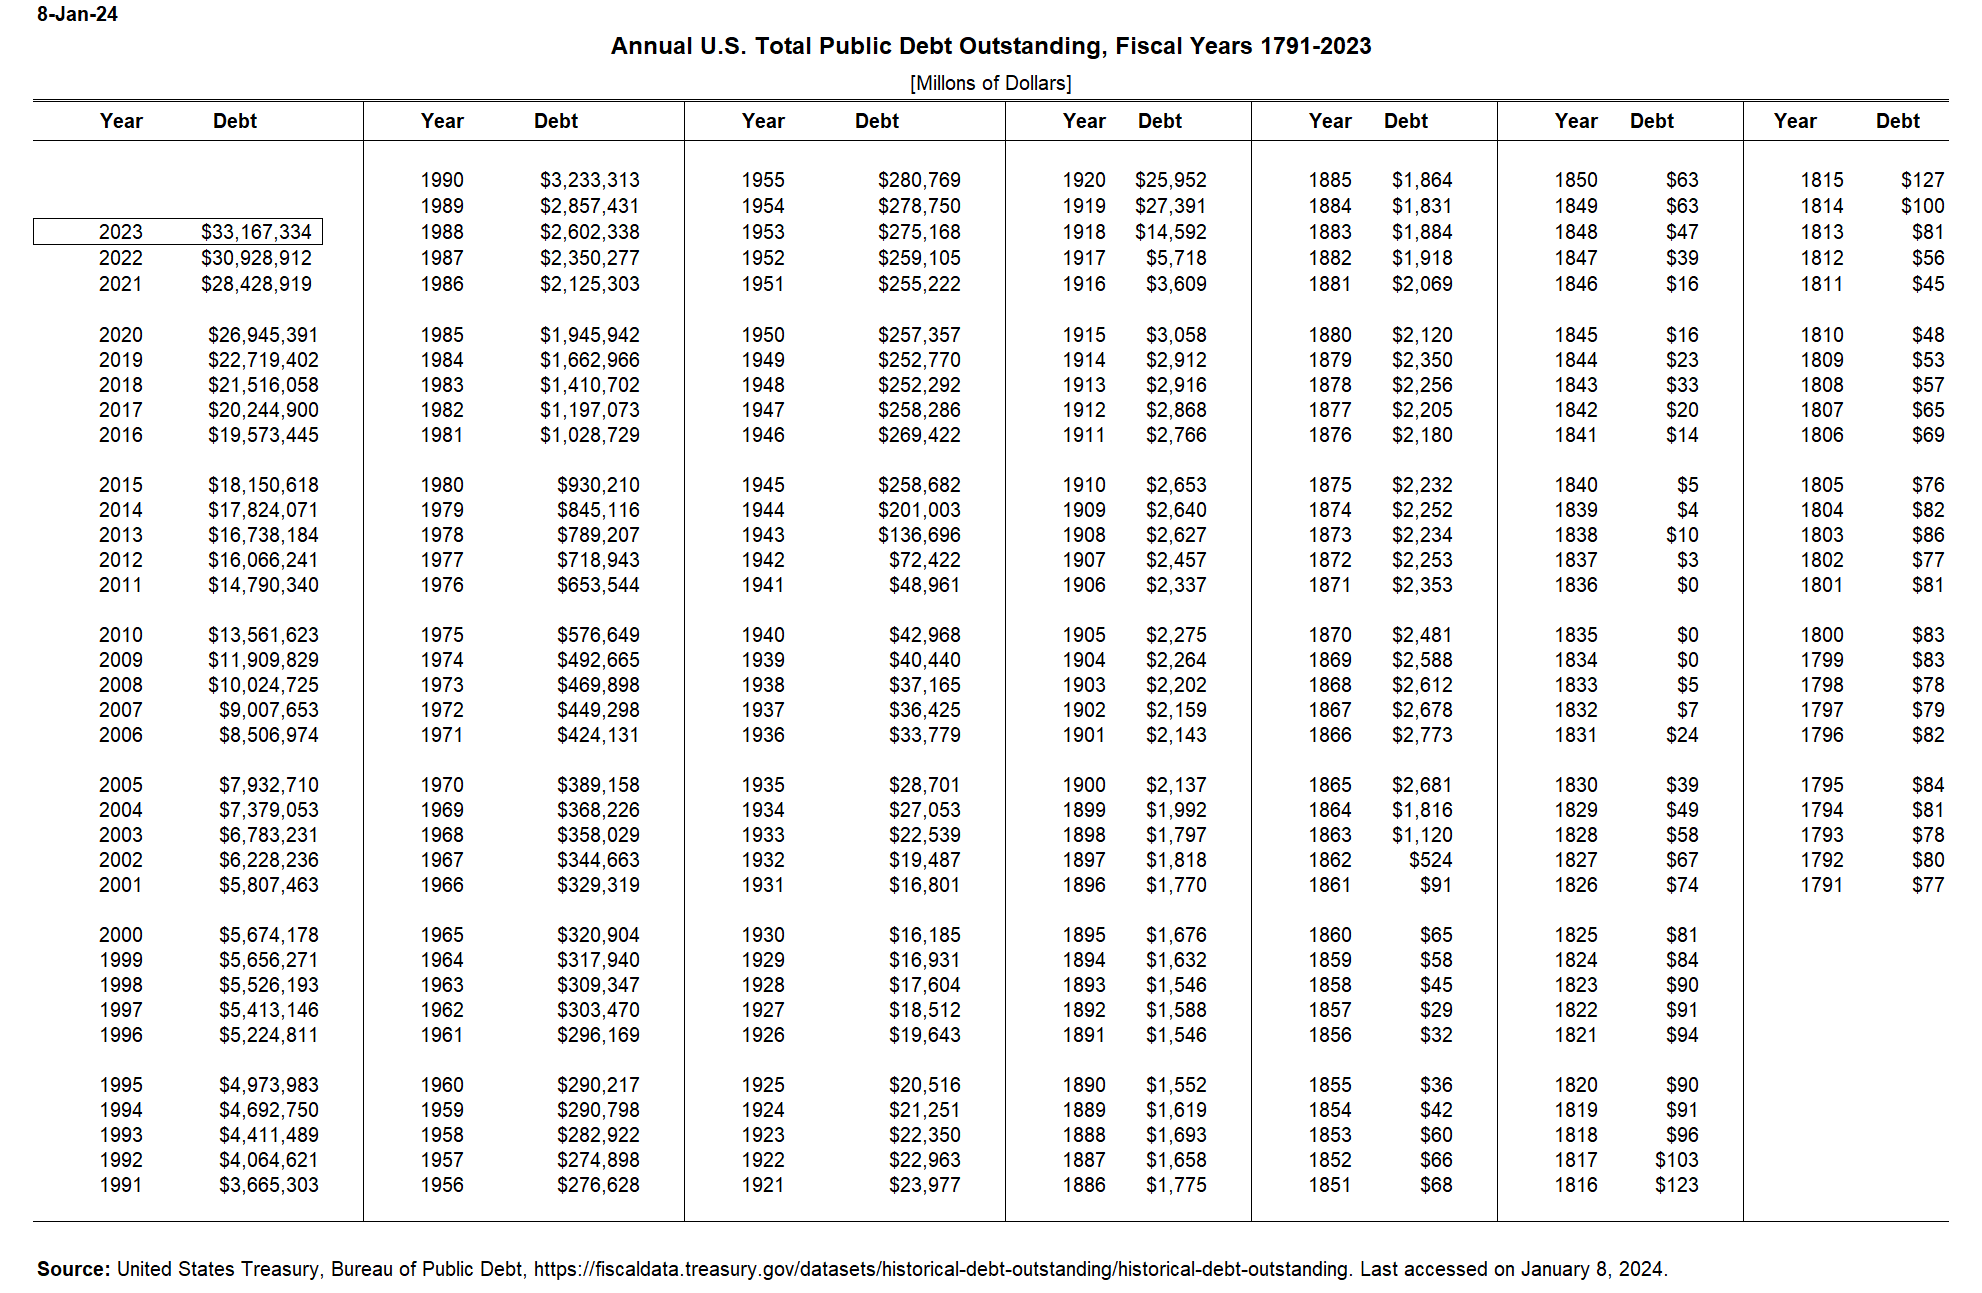 Annual U.S. Total Public Debt Outstanding, Fiscal Years 1791-2023